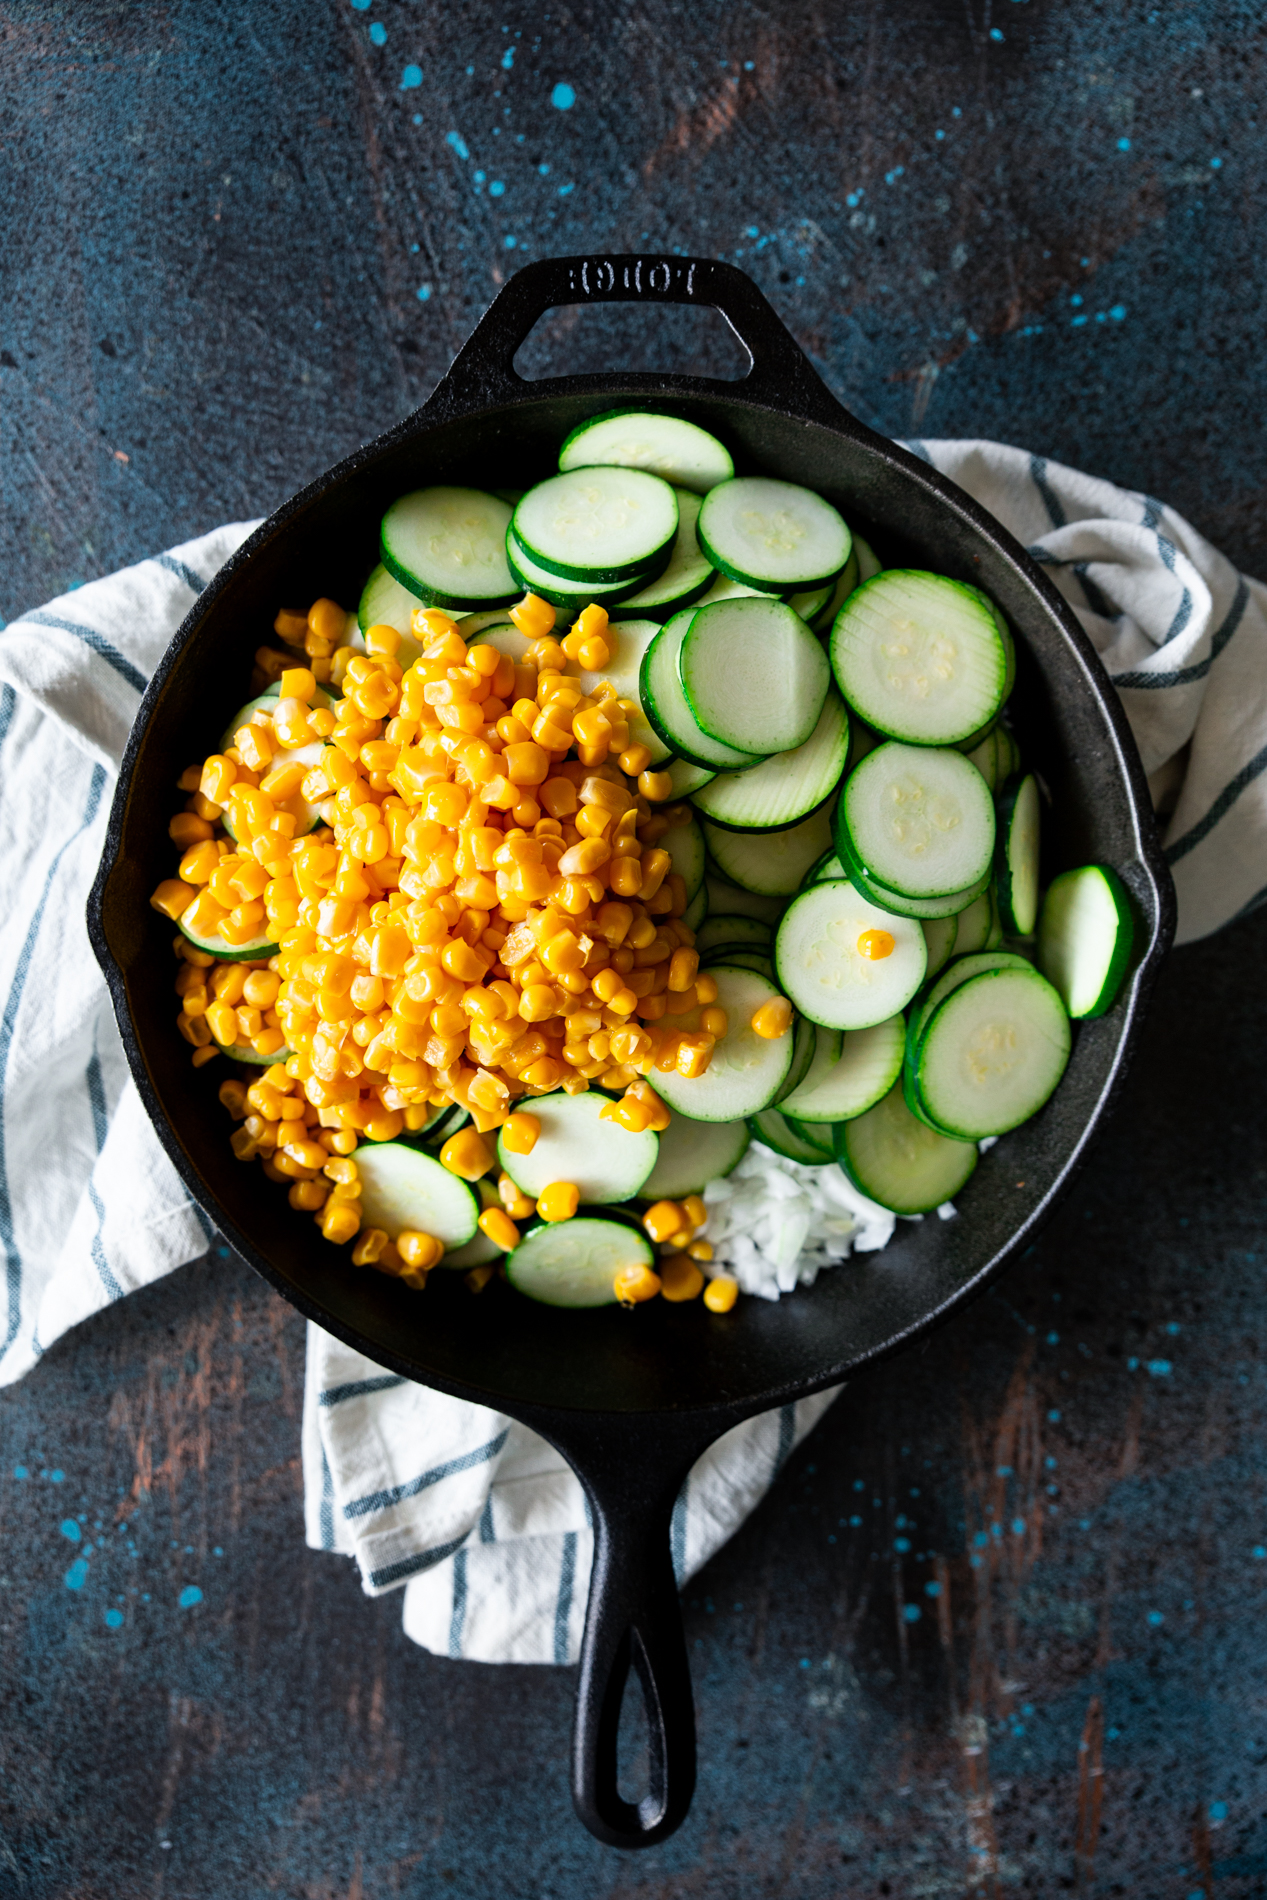 overhead view of a cast iron skillet filled with uncooked onion, zucchini, and corn. the skillet is on top of a striped cloth.